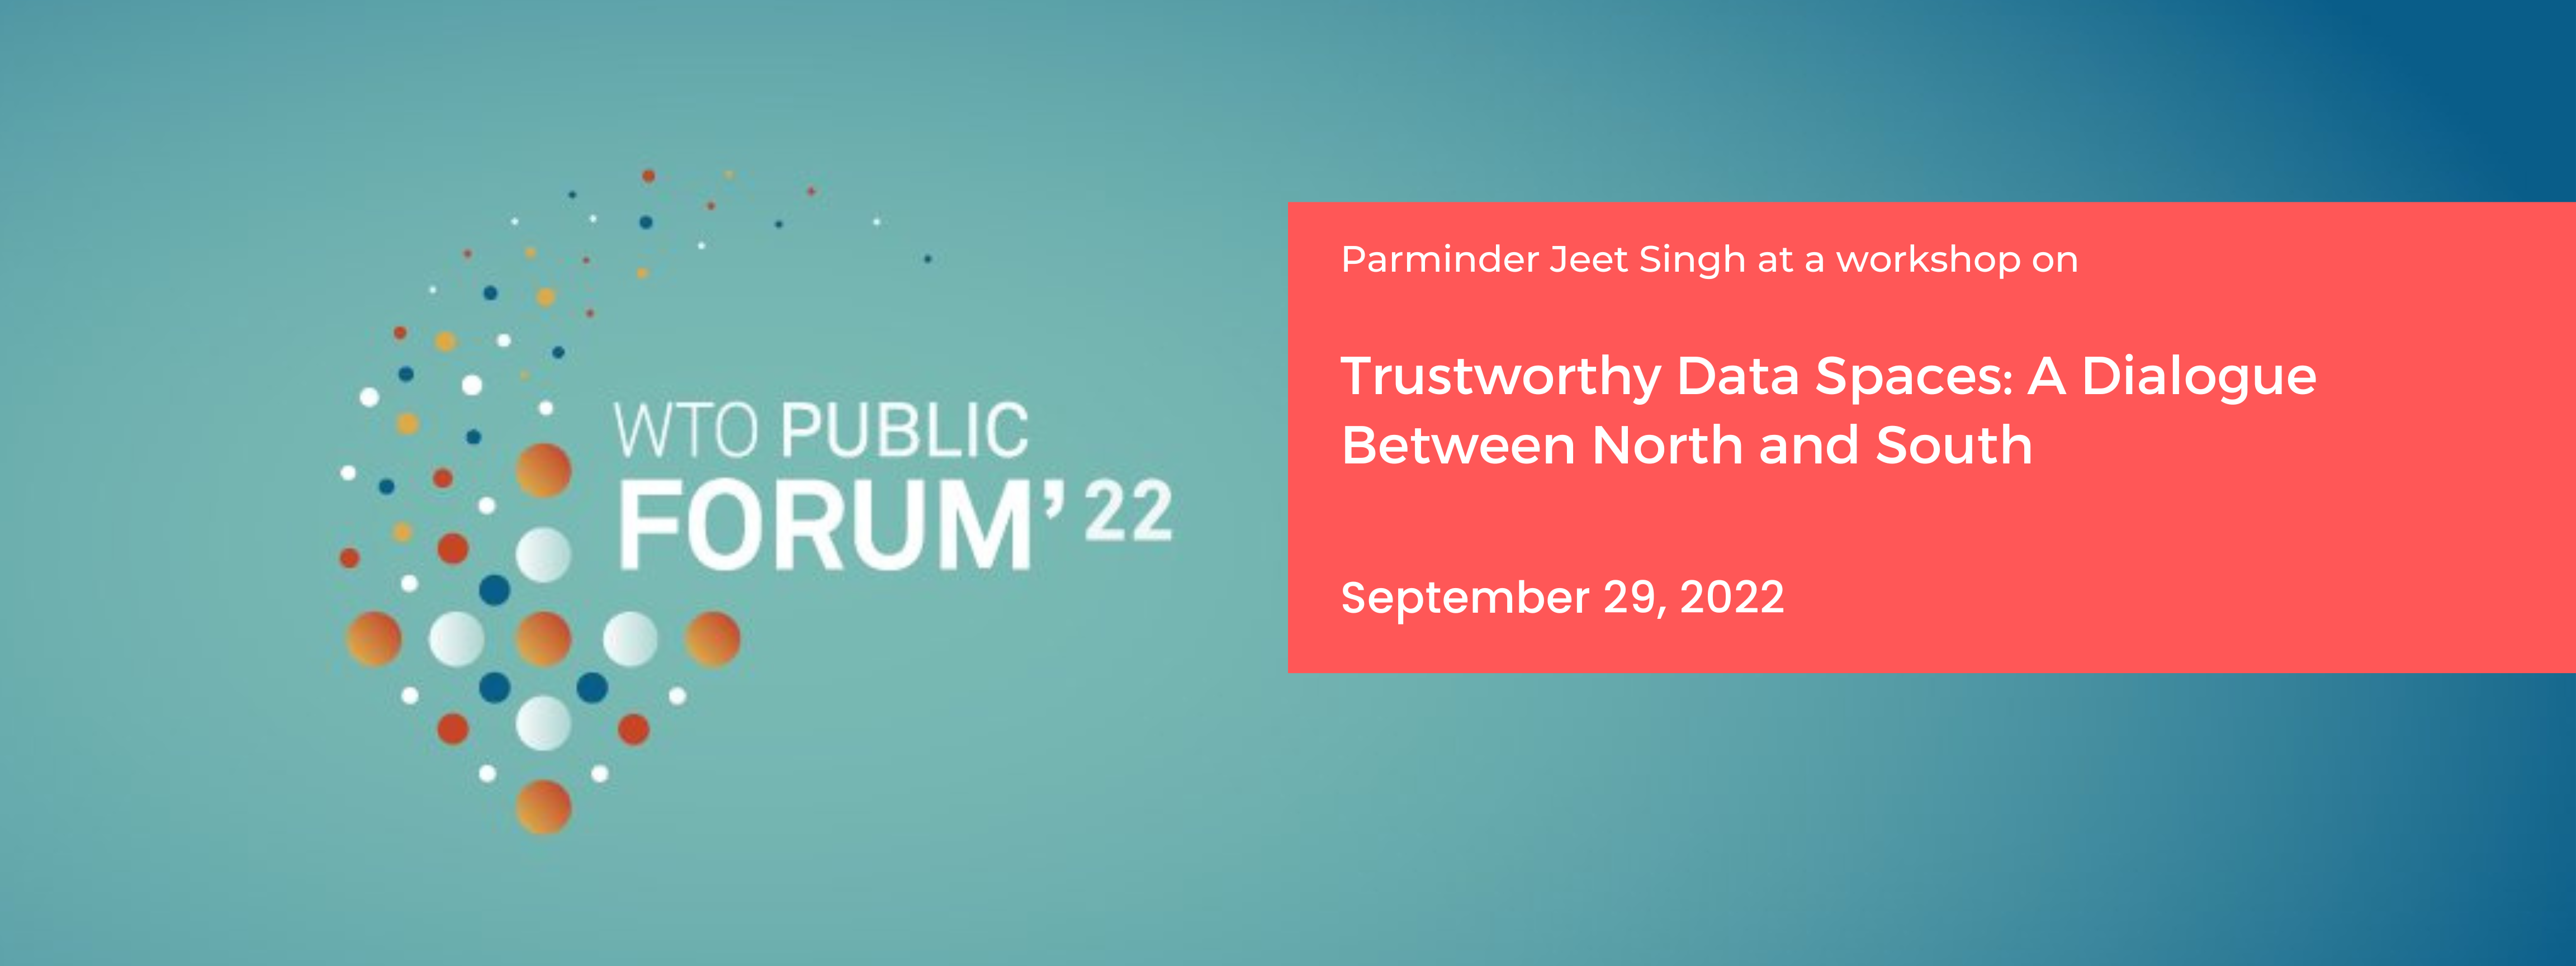 Trustworthy Data Spaces: A Dialogue between North and South